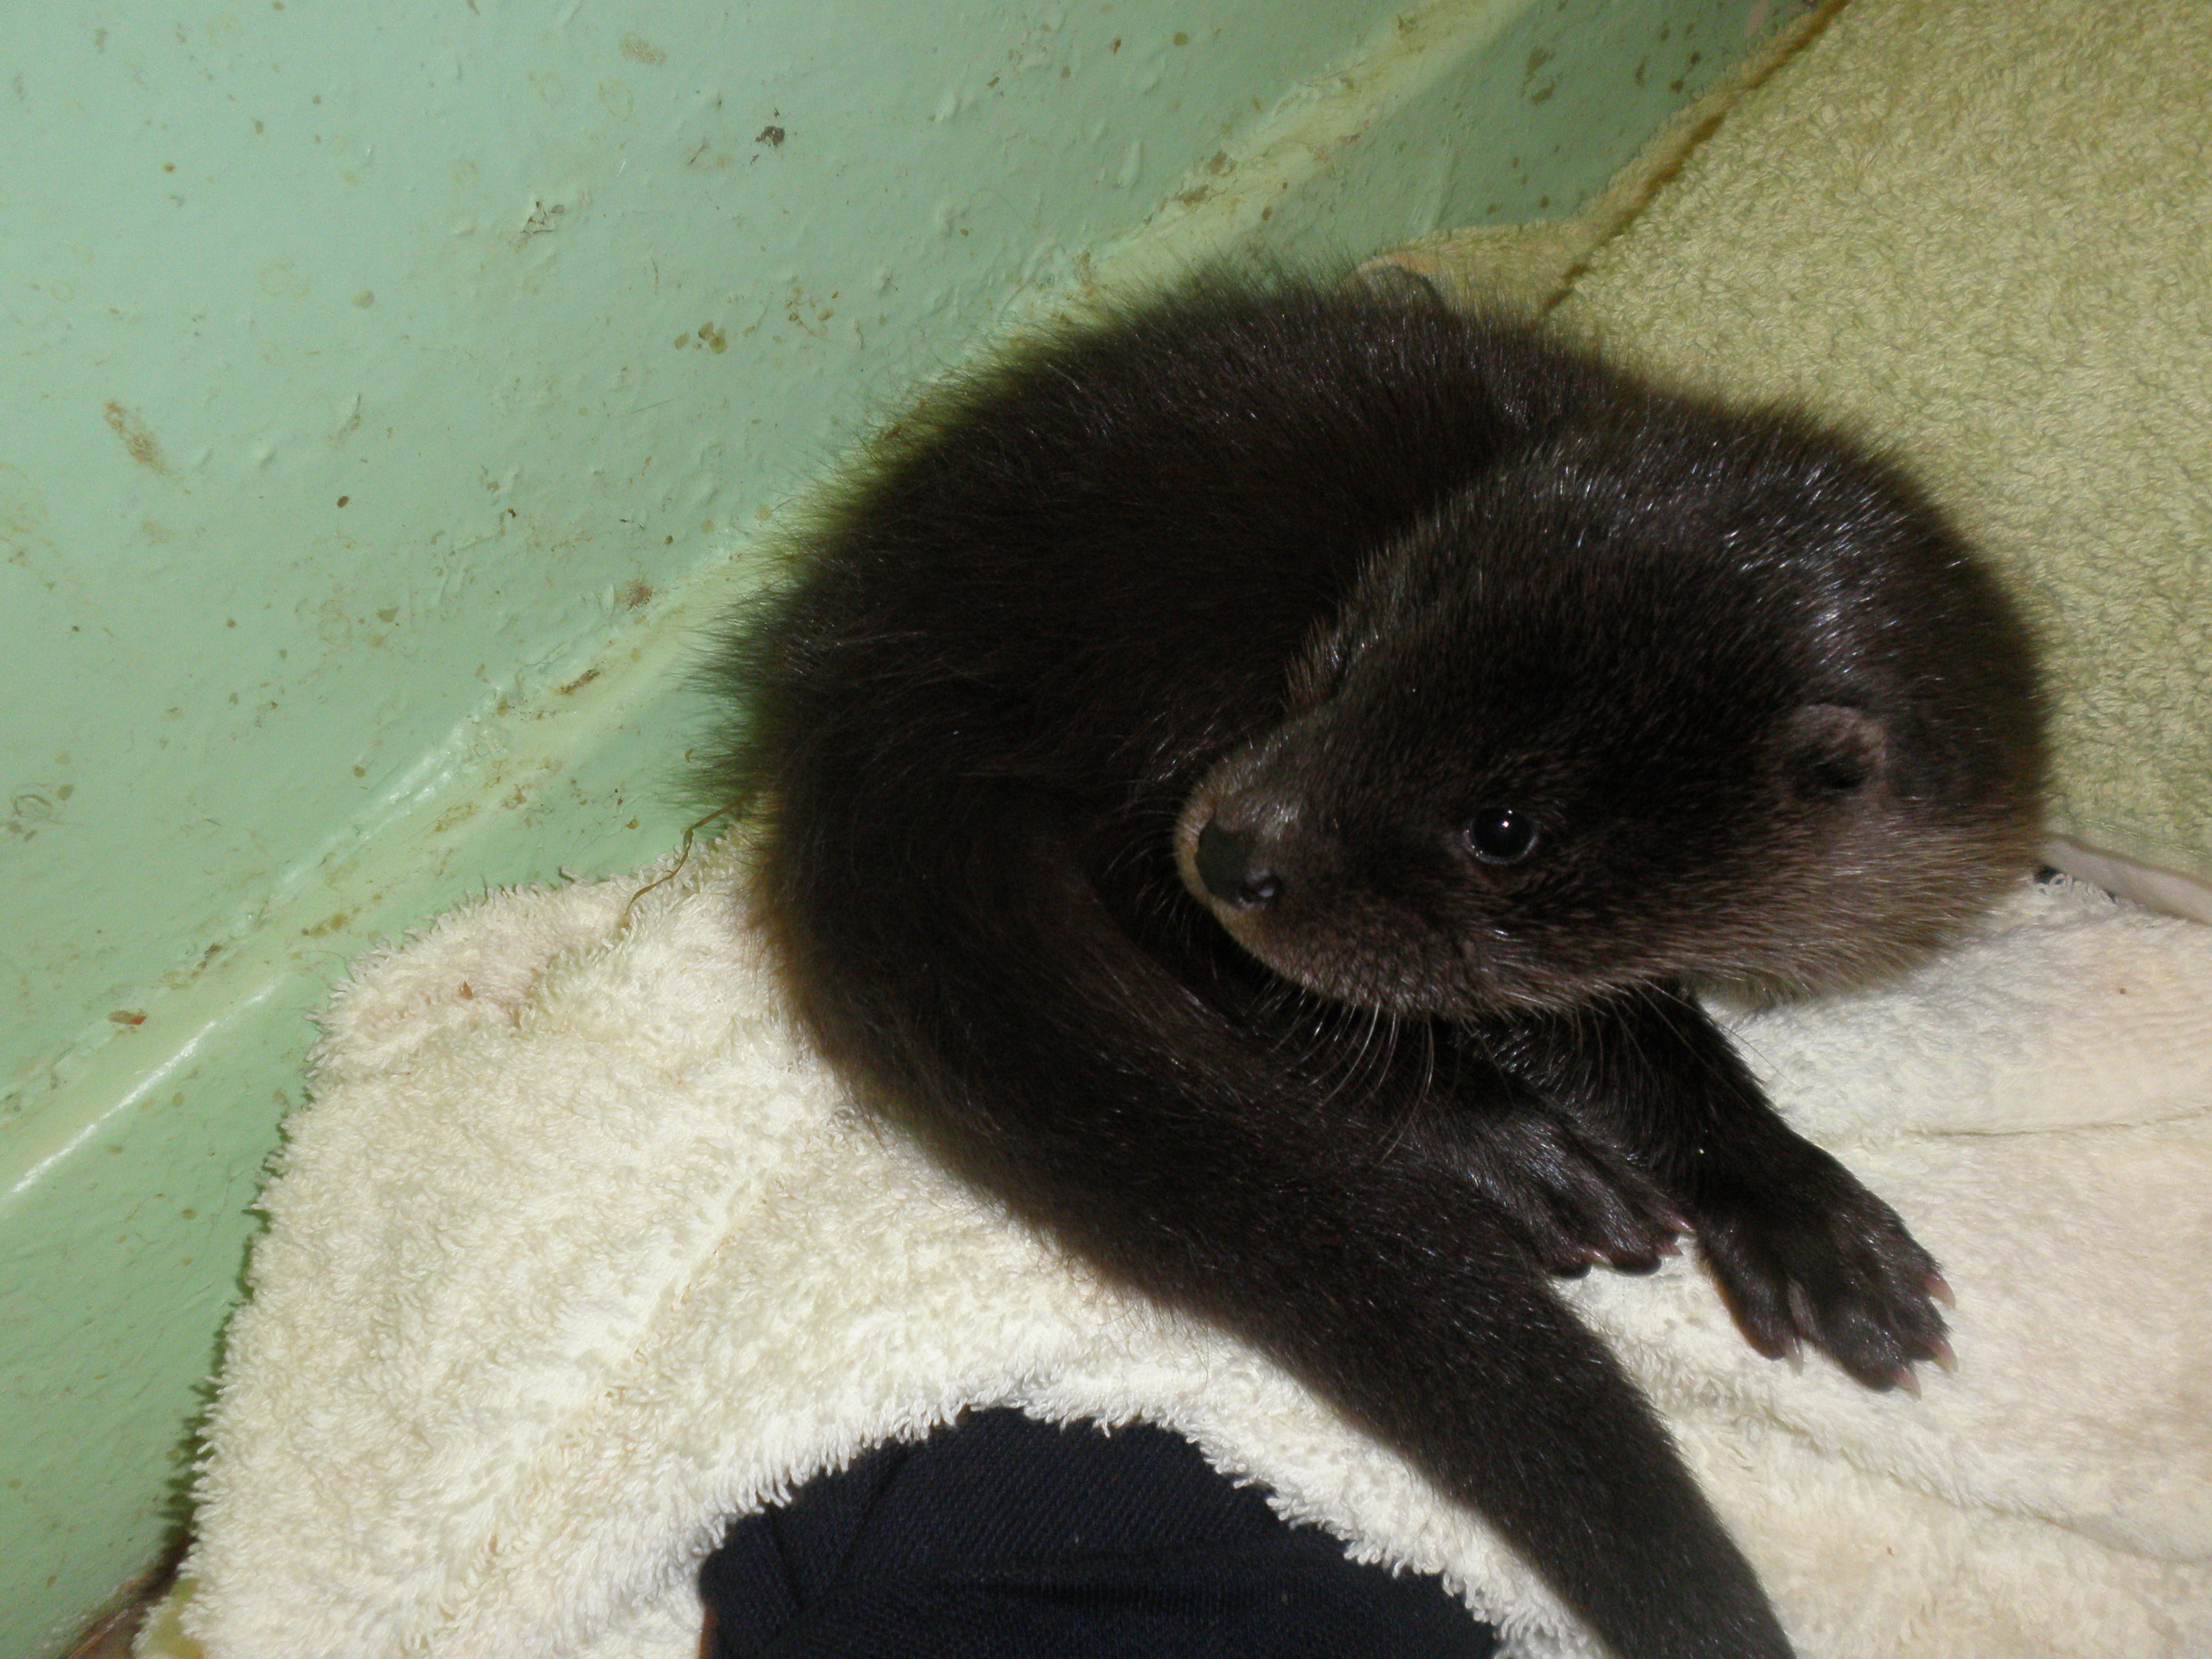 The rescued otter cub who has yet to be given a name